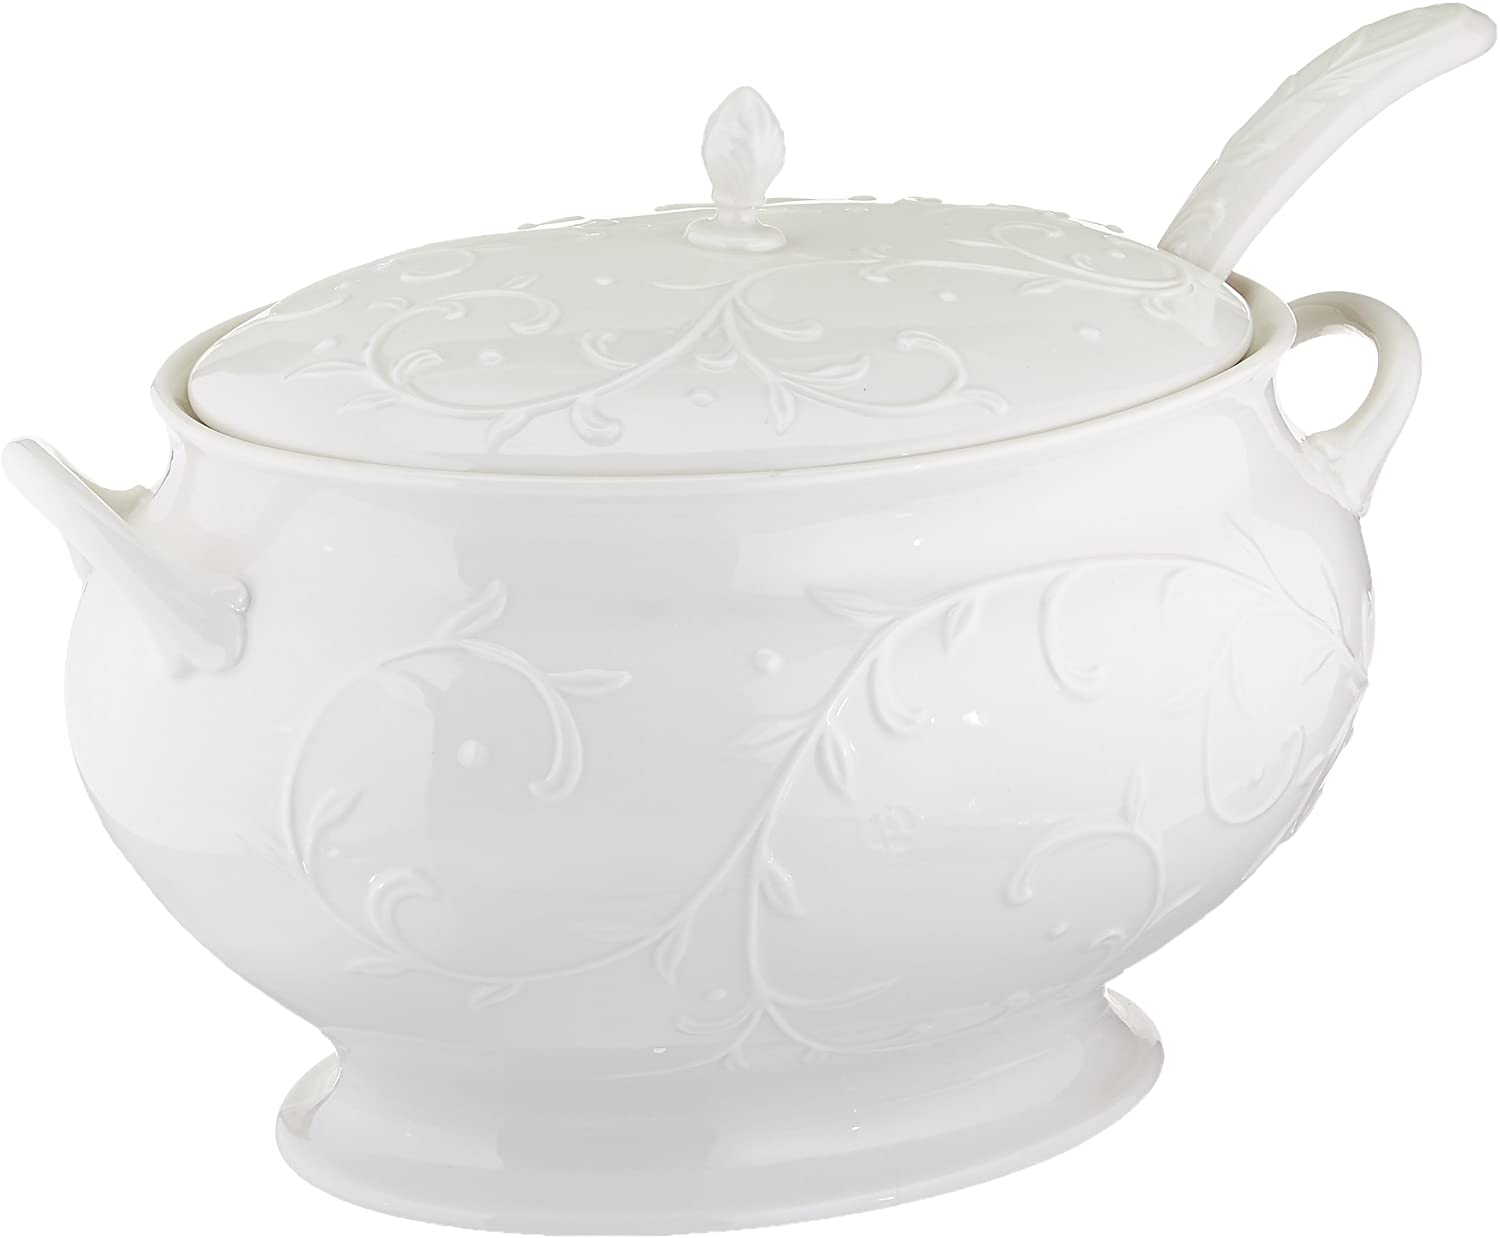 Lenox 830294 Opal Innocence Carved Covered Soup Tureen